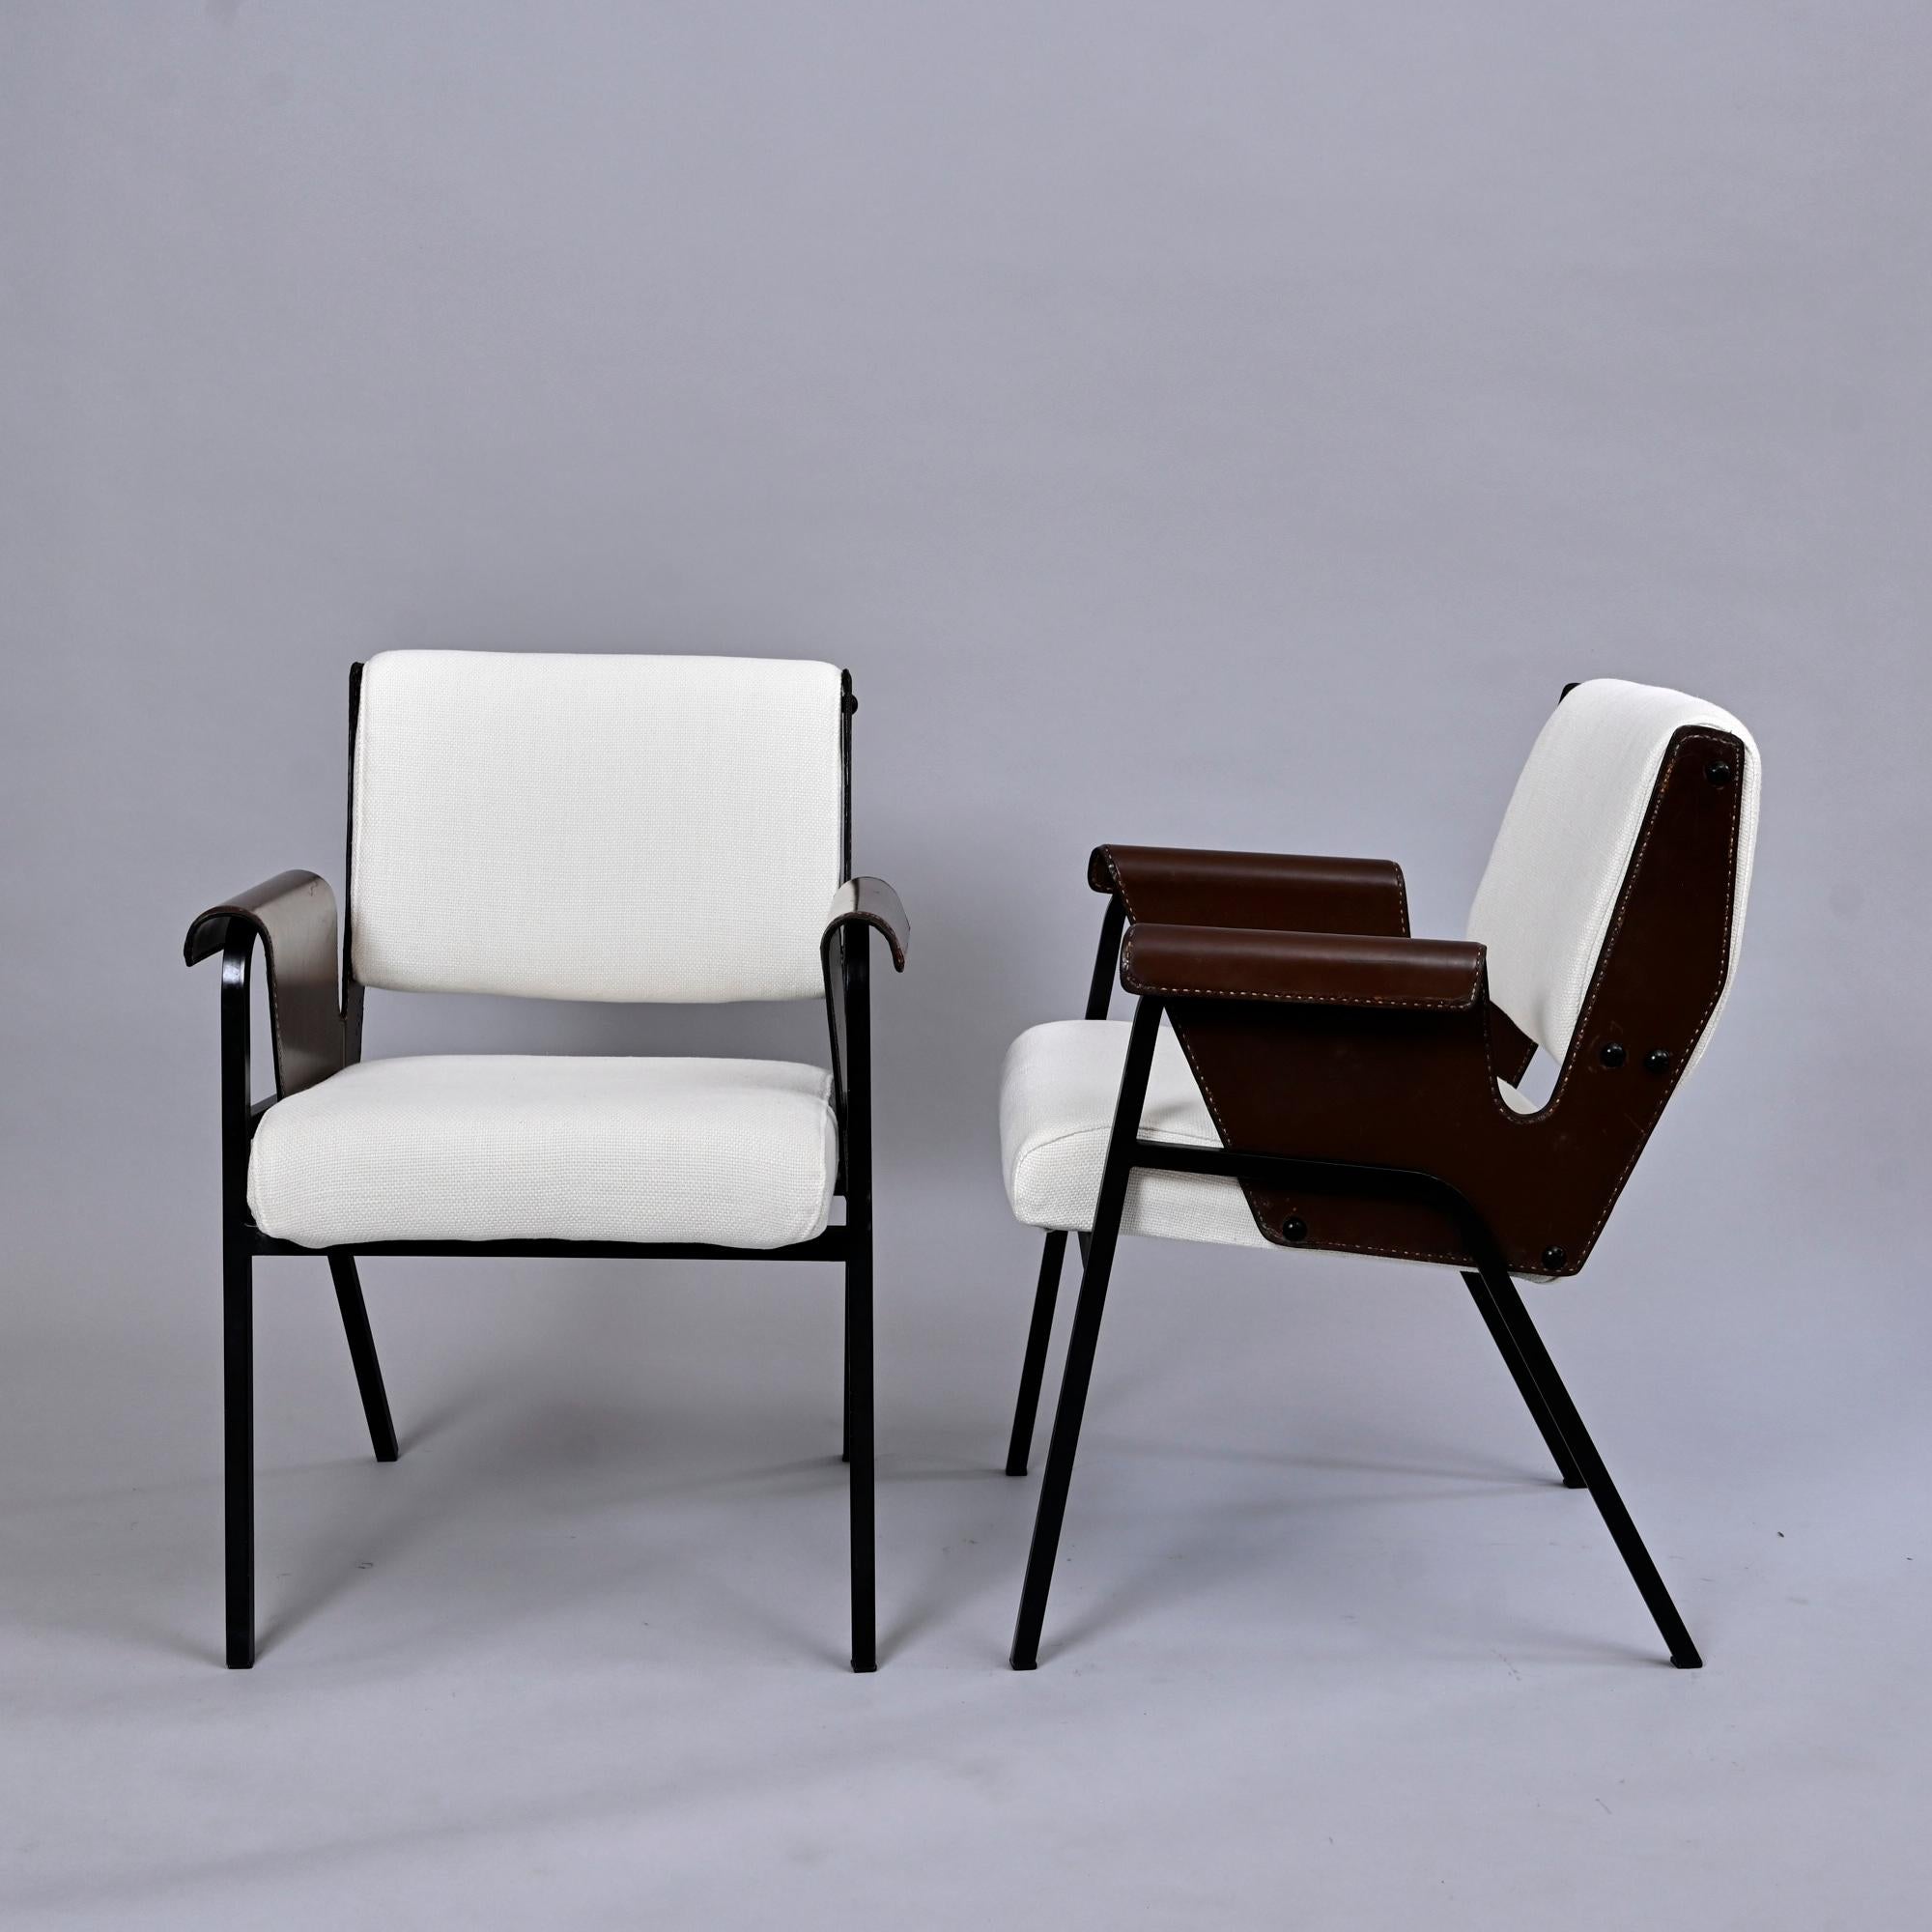 The 'Albanega' armchairs were designed for the San Marco motor vessel in Italy in 1955 by Gustavo Pulizer.

Stitched leather, enamelled steel, upholstery.

These have been reupholstered.